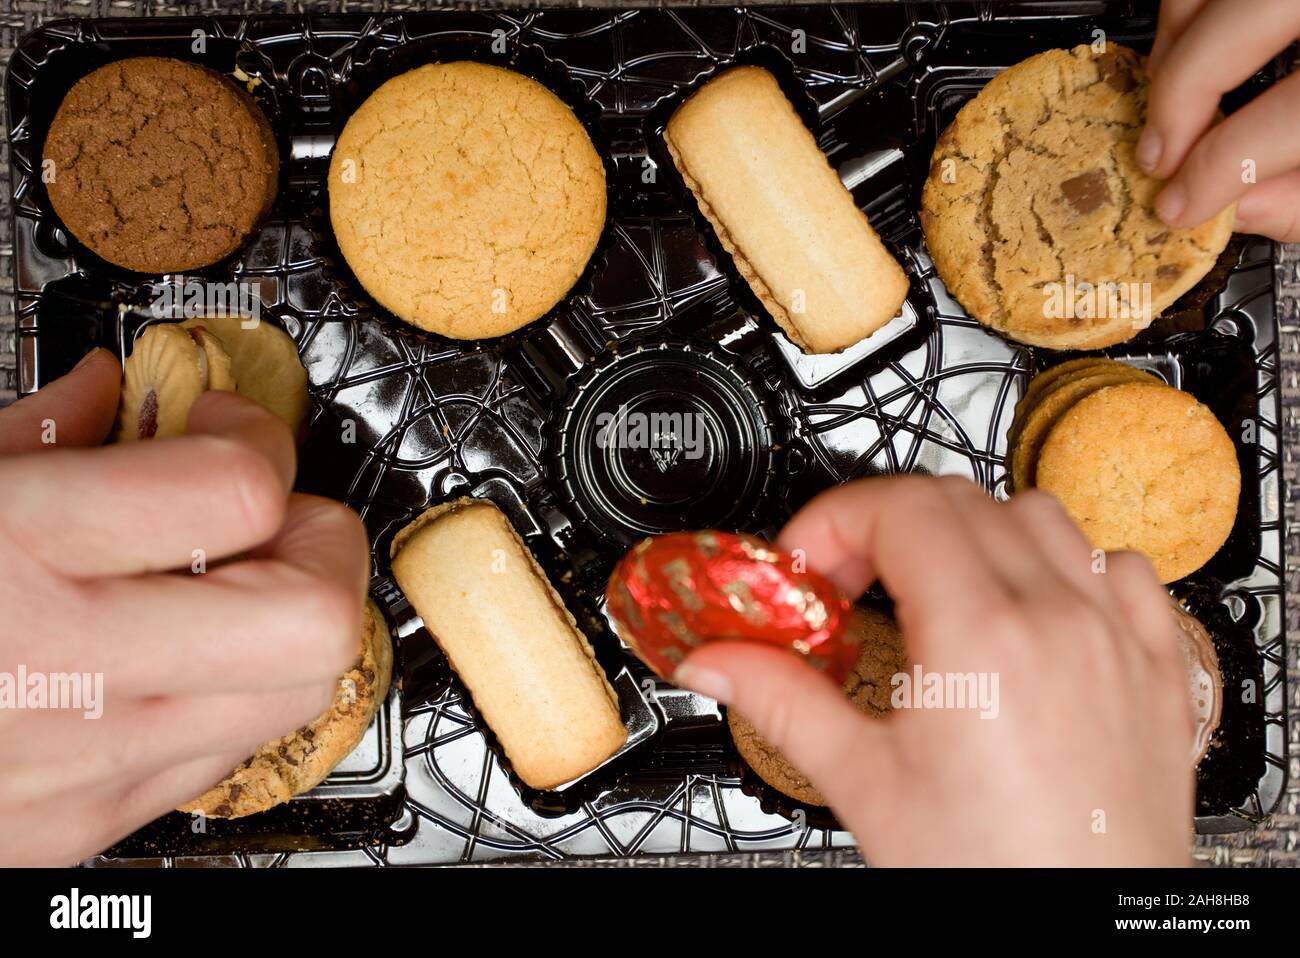 Hands picking out favourite biscuit assortments Stock Photo